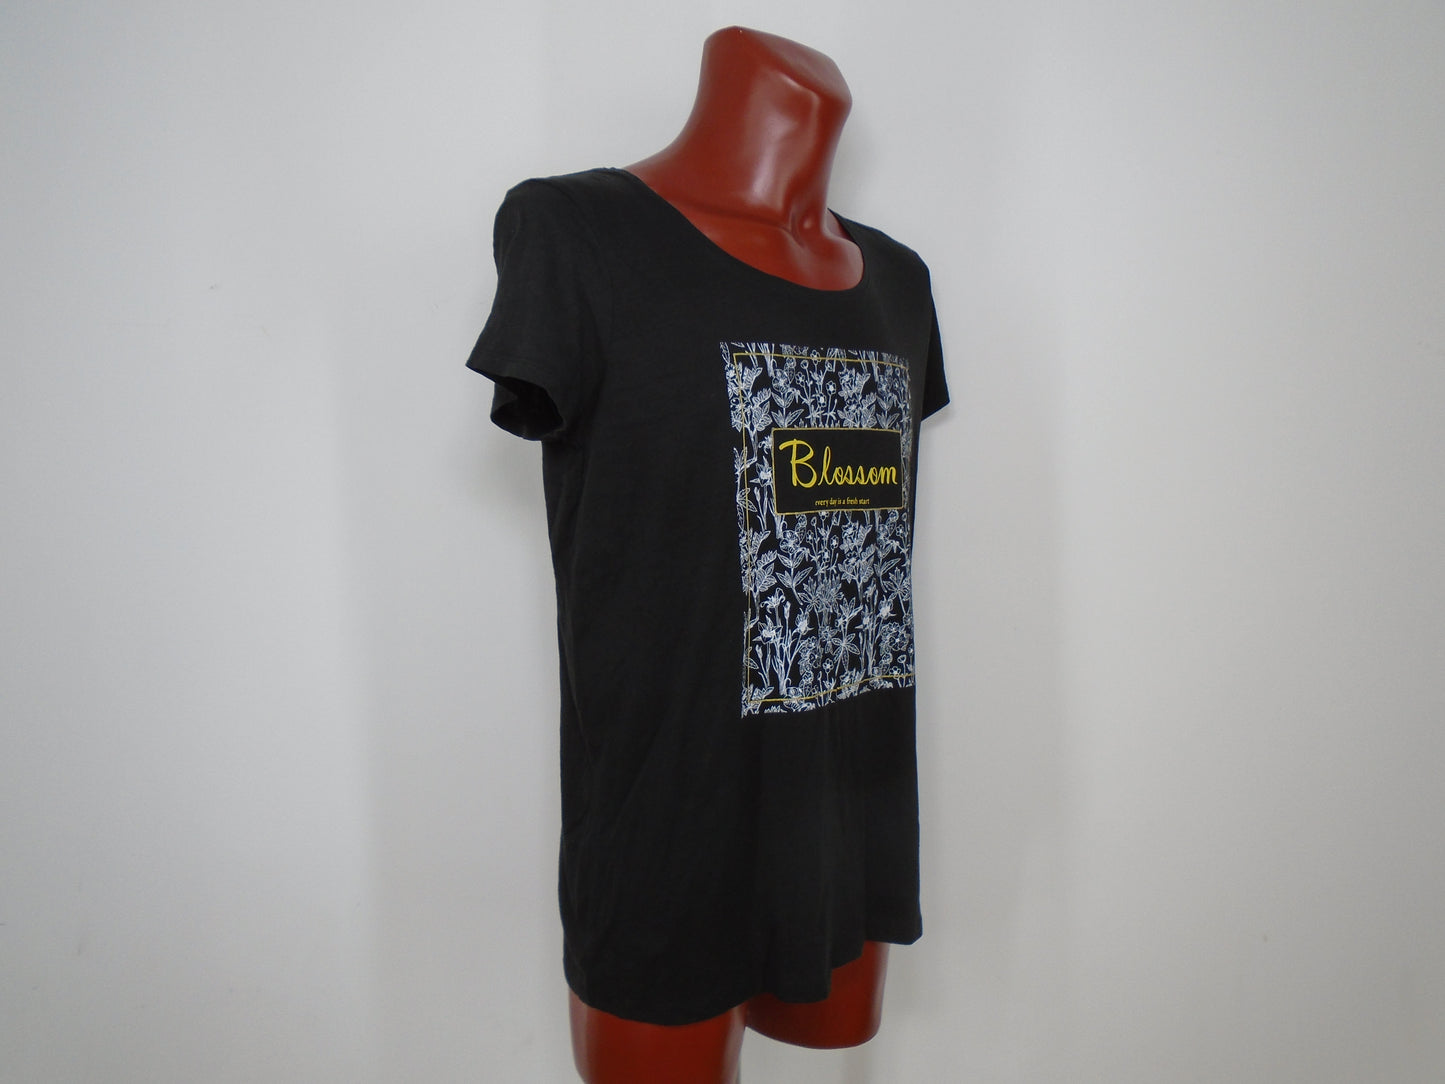 Men's T-Shirt Tissaia. Color: Black. Size: L. Condition: Used.(Very good condition). | 11920775